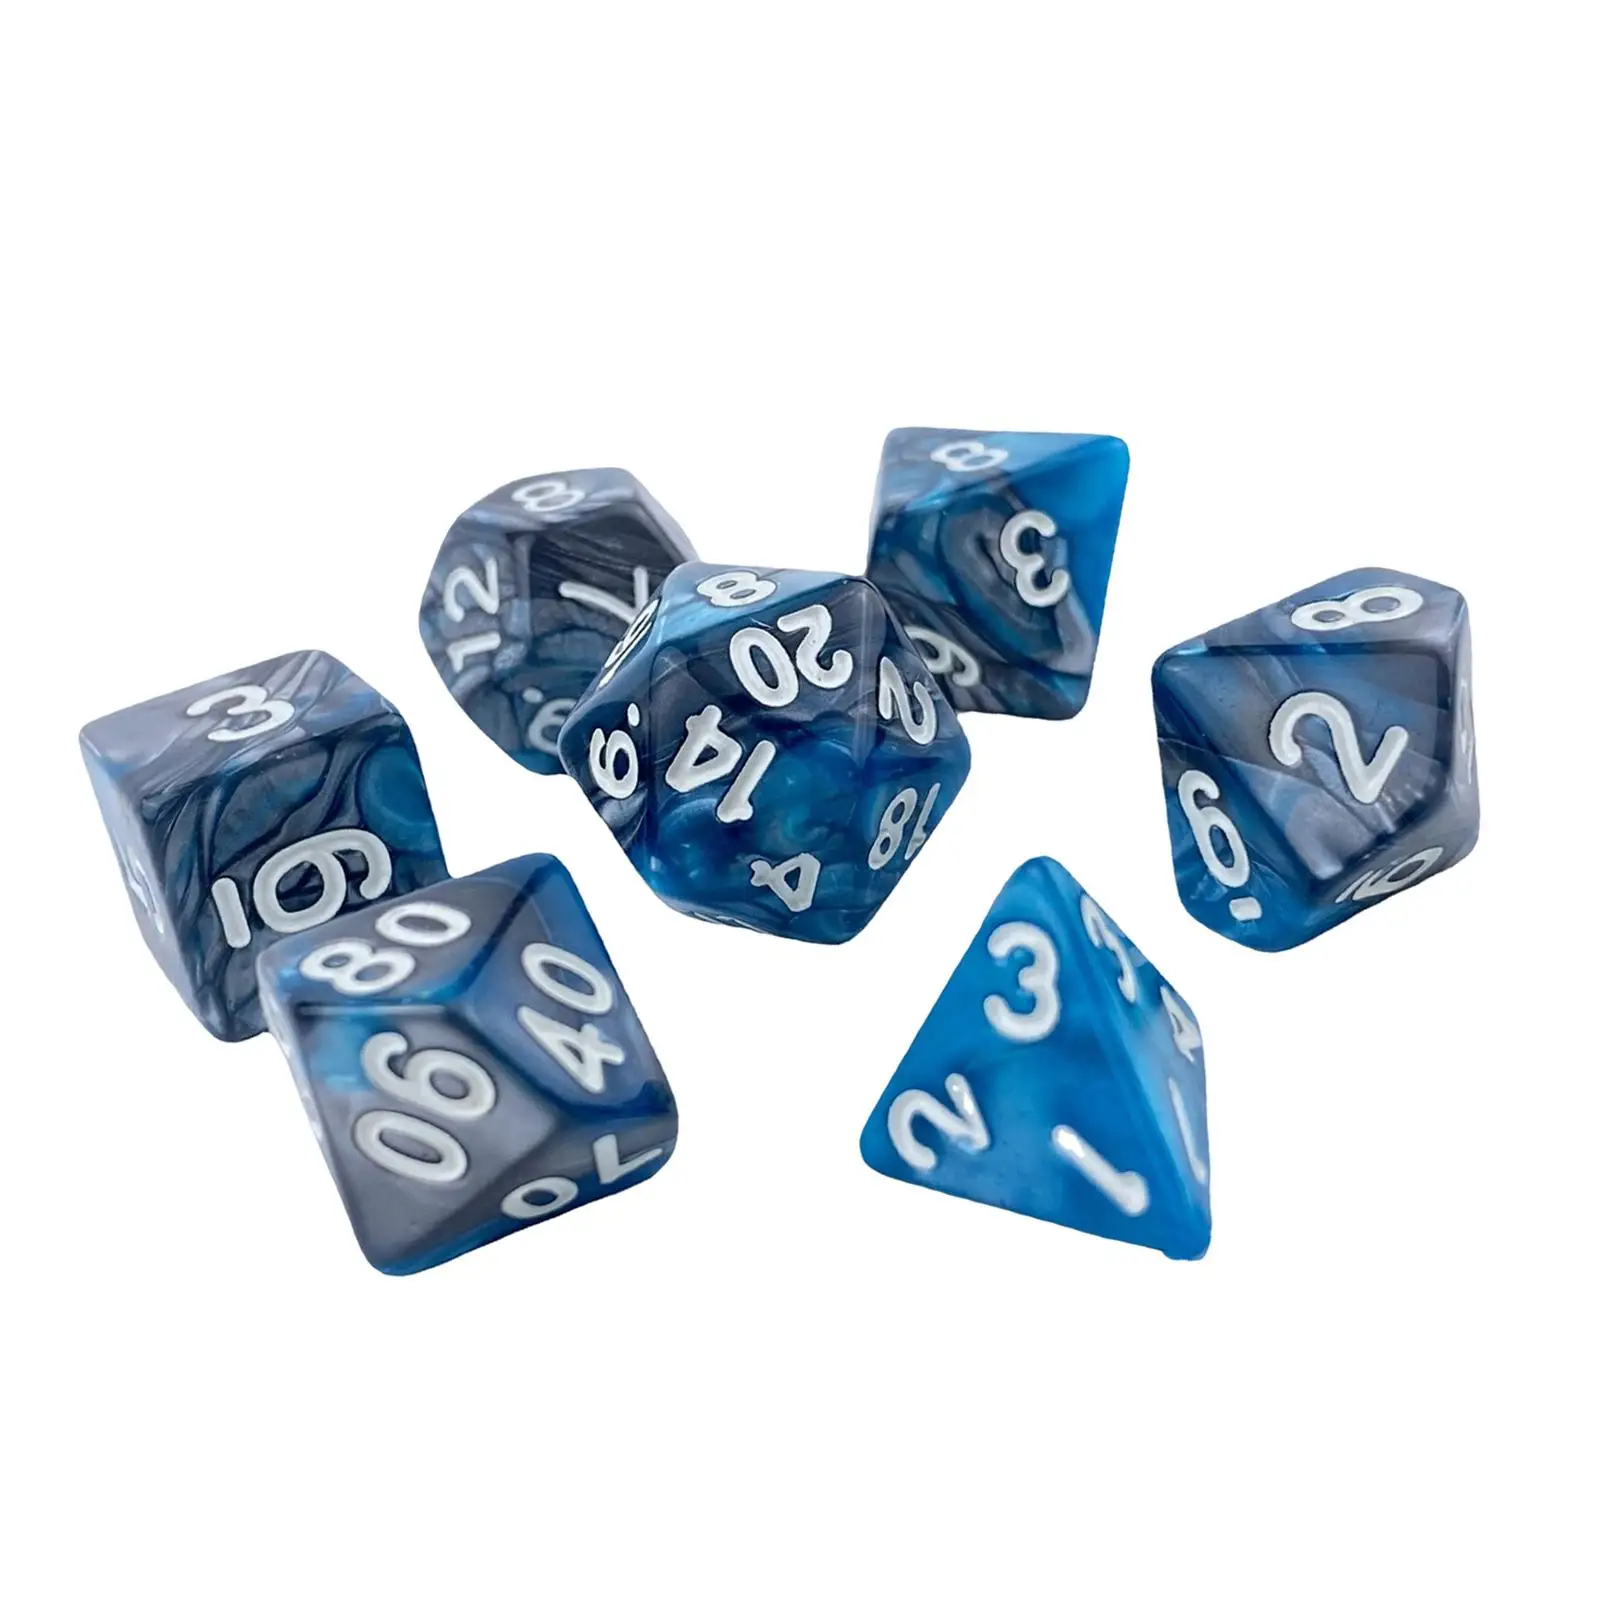 Acrylic Dices D4 D8 Polyhedral Dices Table Game , Family Gathering,